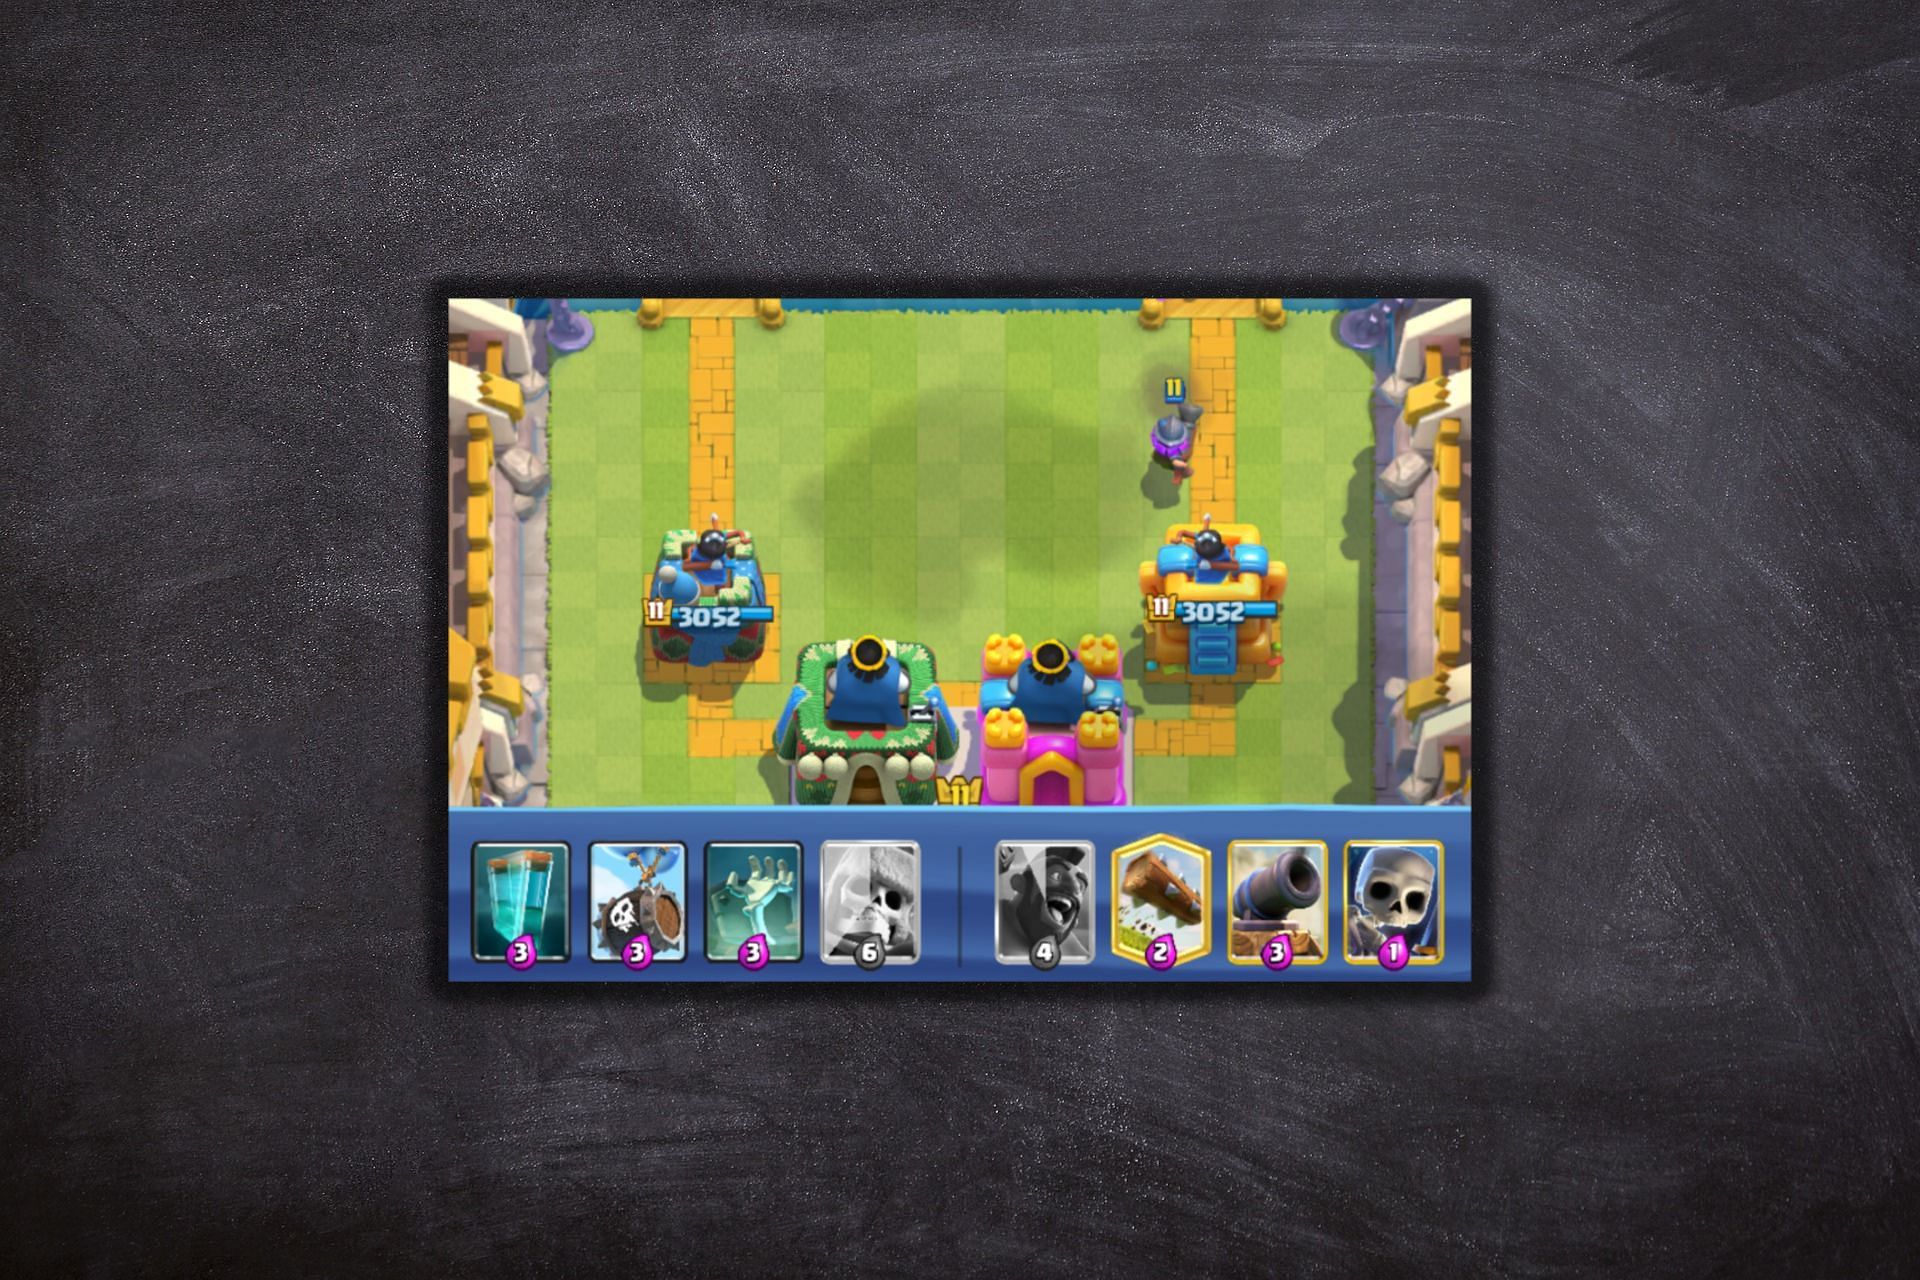 Positioning and timing (Image via Supercell)